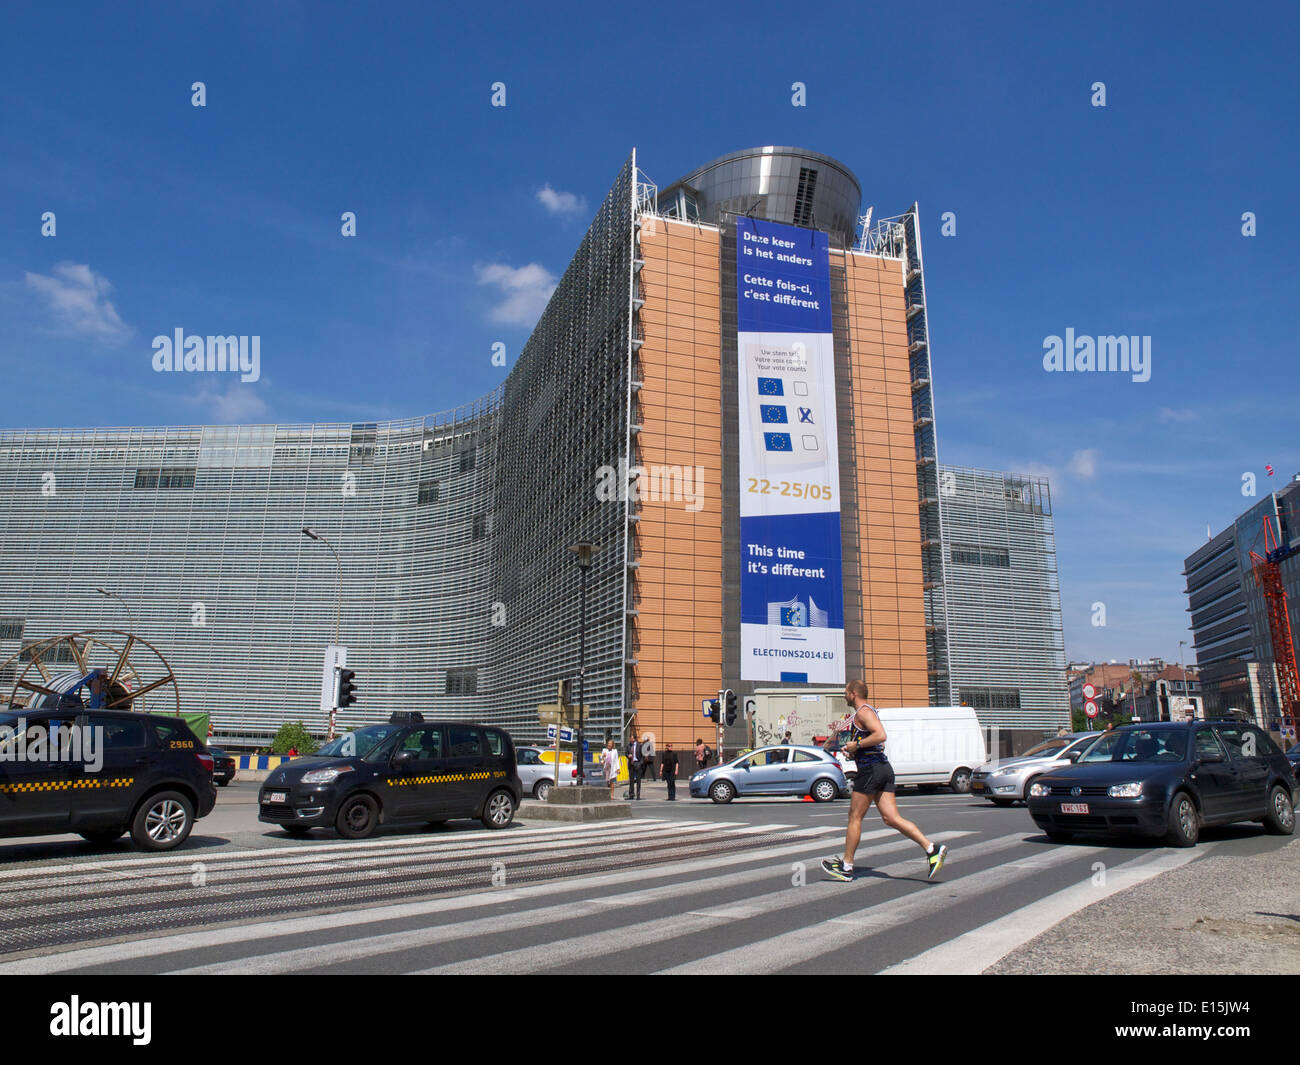 European Commission berlaymont building with runner crossing the street and parked taxis, Brussels, Belgium Stock Photo